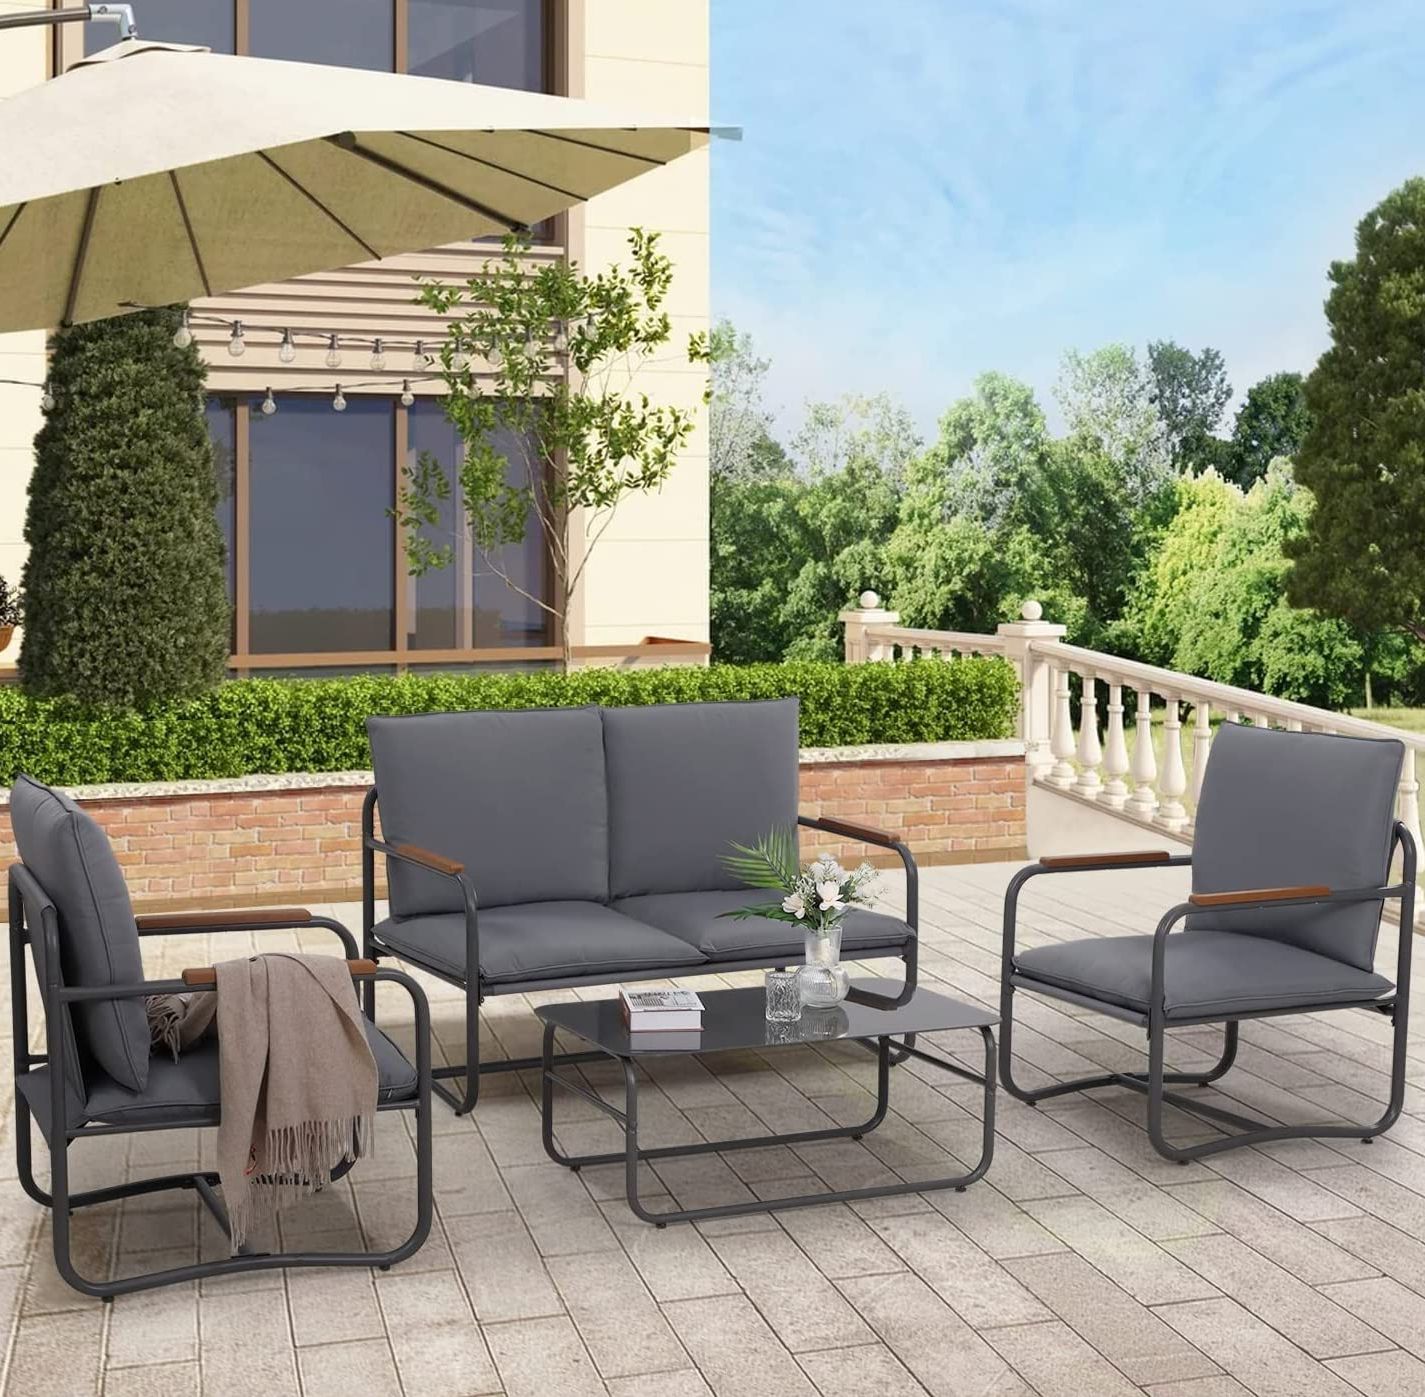 Side Table Iron Frame Patio Furniture Set With Widely Used Amazon: May In Color Metal Patio Furniture Set 4 Piece Wide Seating  Conversation Sets Outdoor Sectional Sofa, Loveseat, Chair, Glass Coffee  Table,8 Cushions, Comfortable, Easy Assemble, Dark Grey 1 : Patio, Lawn &  Garden (View 3 of 15)